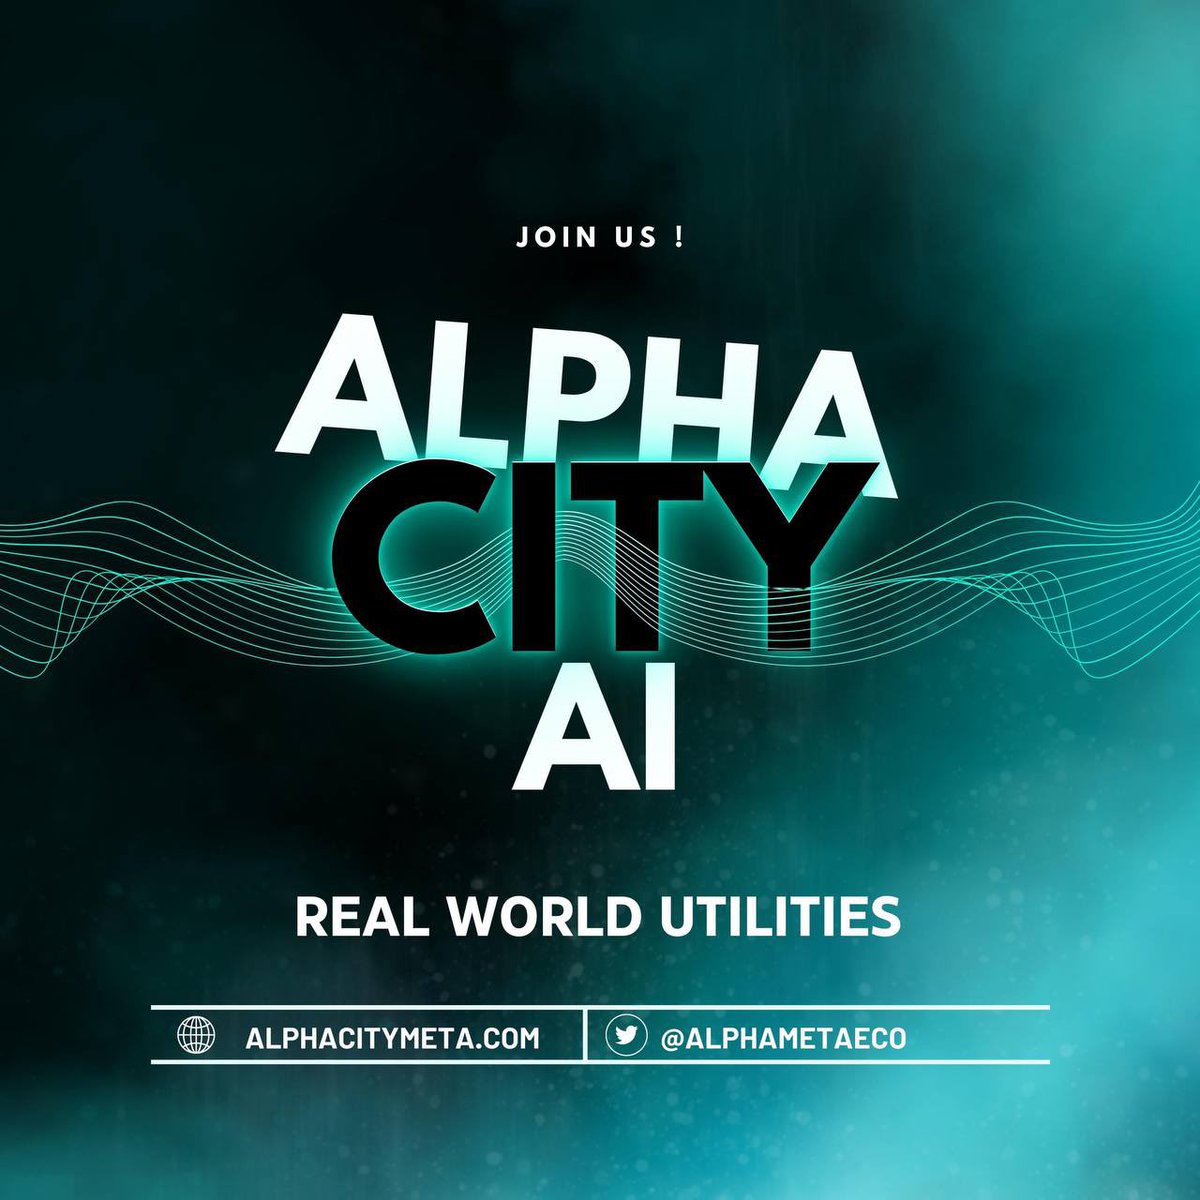 Experience the groundbreaking and visually stunning $ALPHA metaverse, where users can explore, create, and monetize content in a hyper-realistic virtual world.
$ALPHA #AlphaCityAI